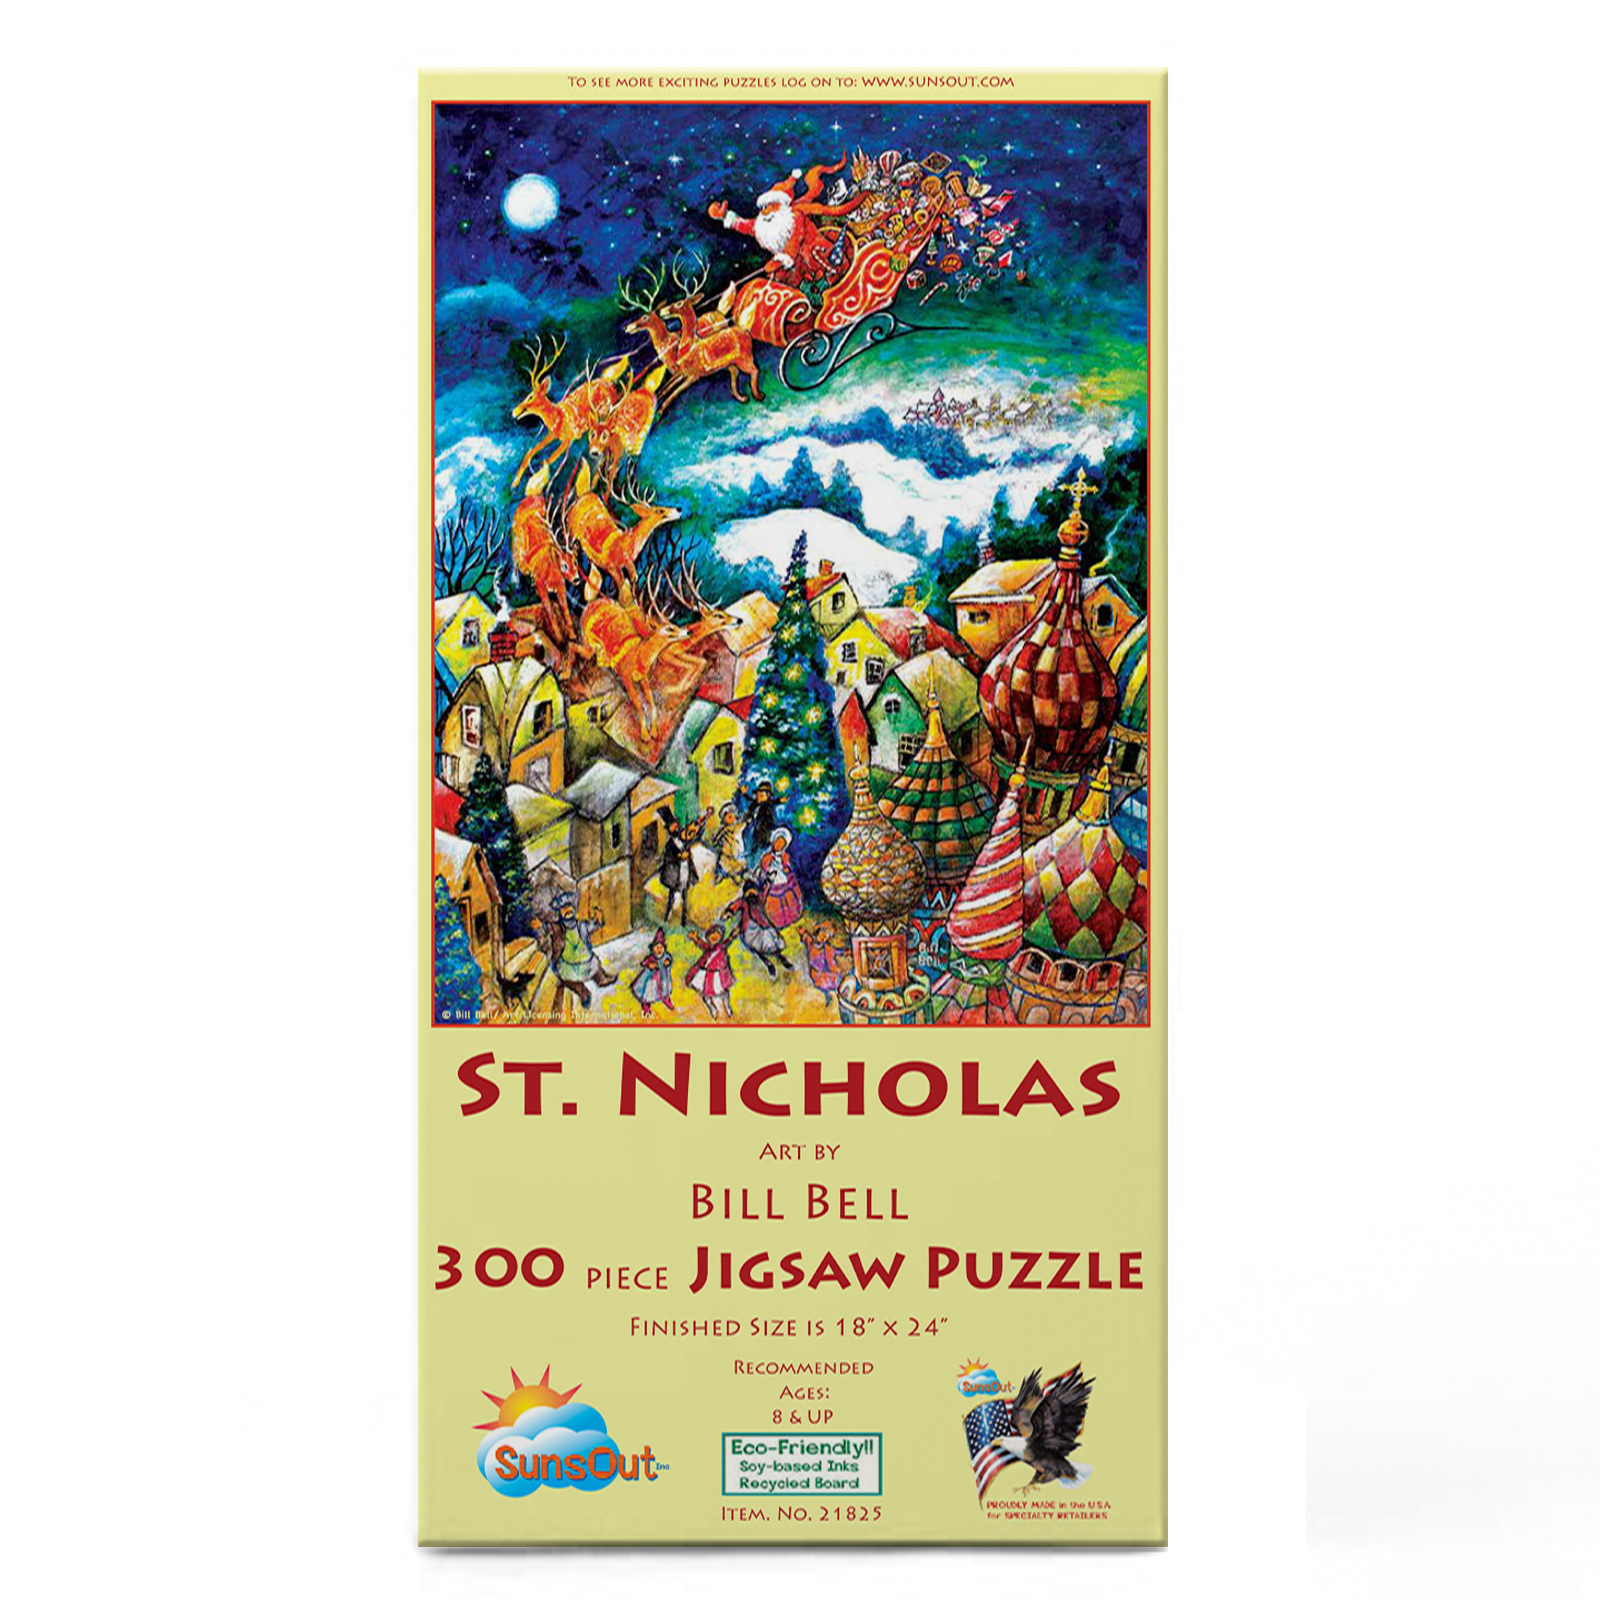 SUNSOUT INC - St. Nicholas - 300 pc Jigsaw Puzzle by Artist: Bill Bell - Finished Size 18" x 24" Christmas - MPN# 21825 - image 3 of 5